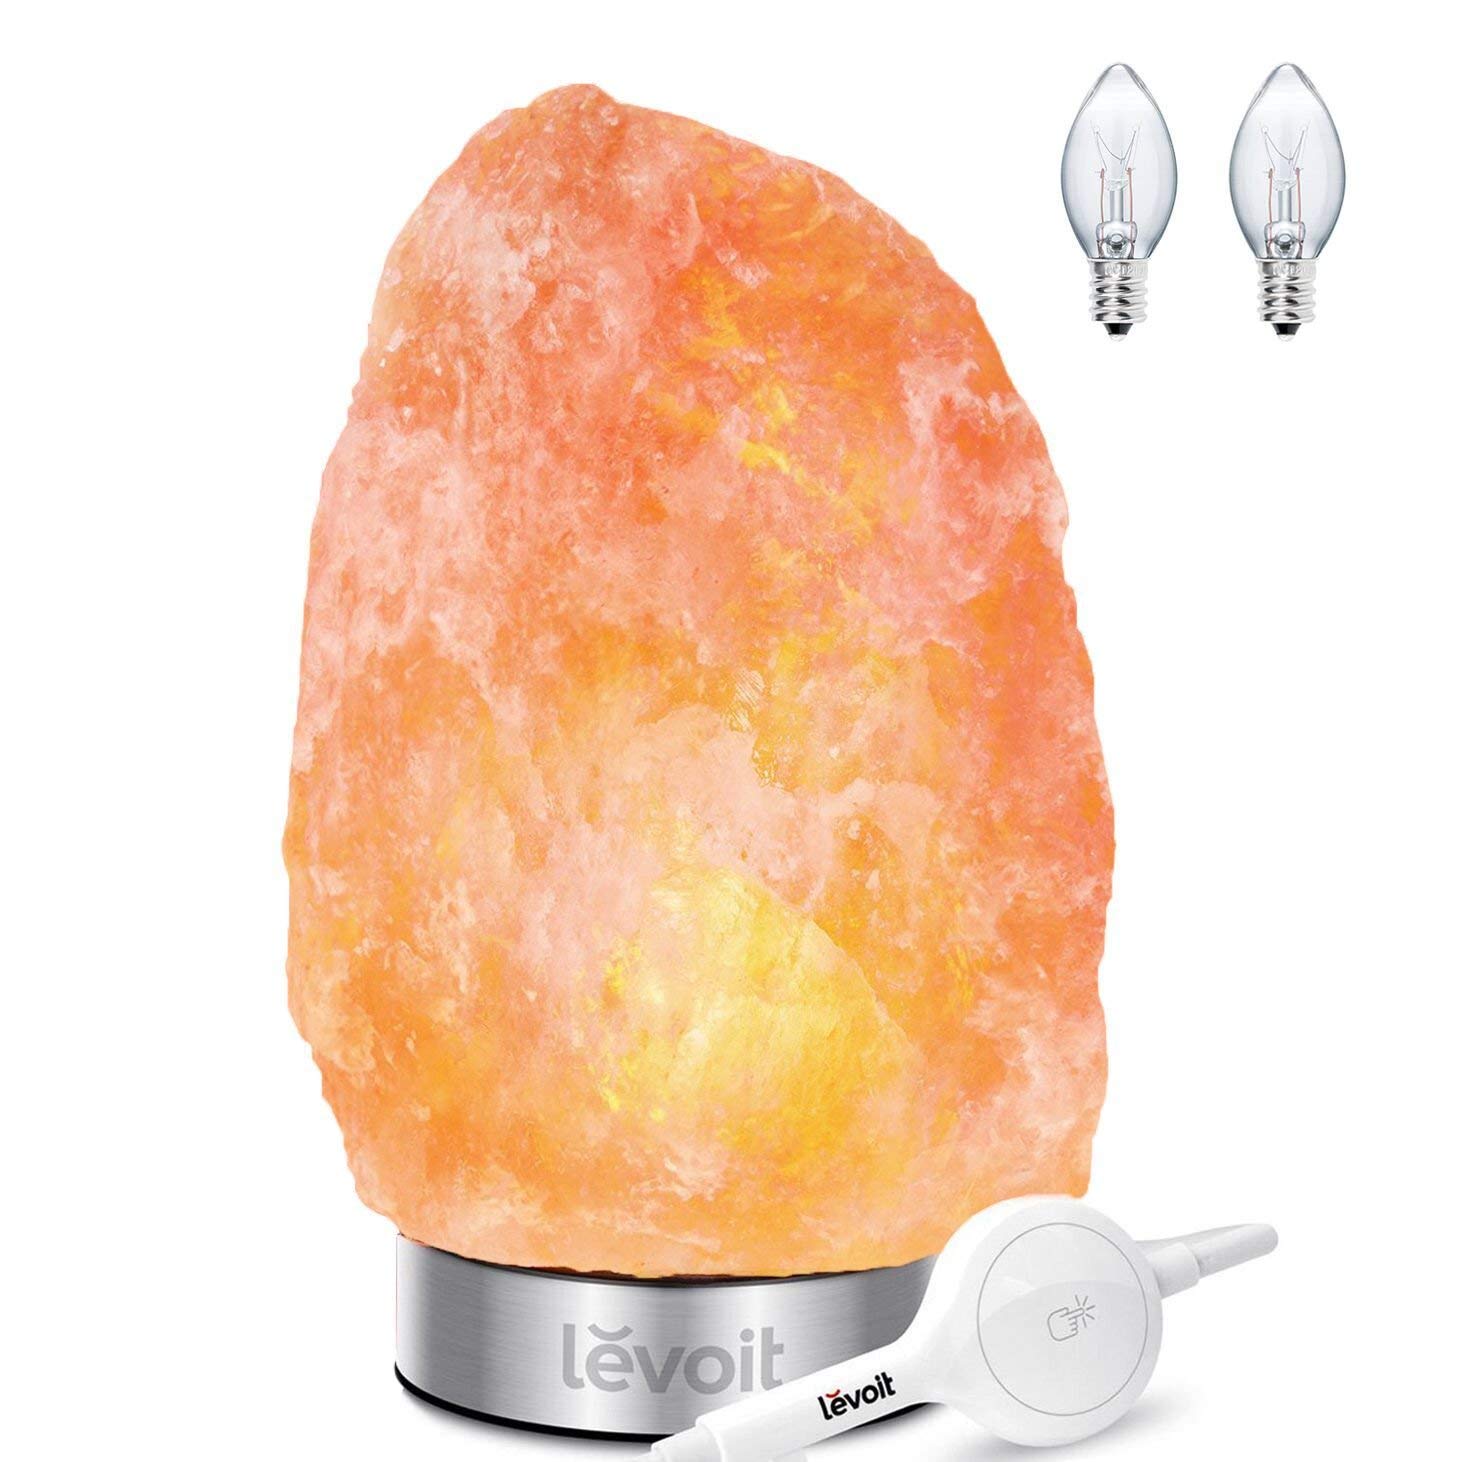 LEVOIT Kyra Himalayan Salt Lamp Pink Crystal Hand Carved Hymalain Premium Stainless Steel Base, Dimmable Touch Switch, Holiday Gift, (UL-Listed, 2 Extra Original Bulbs Included)